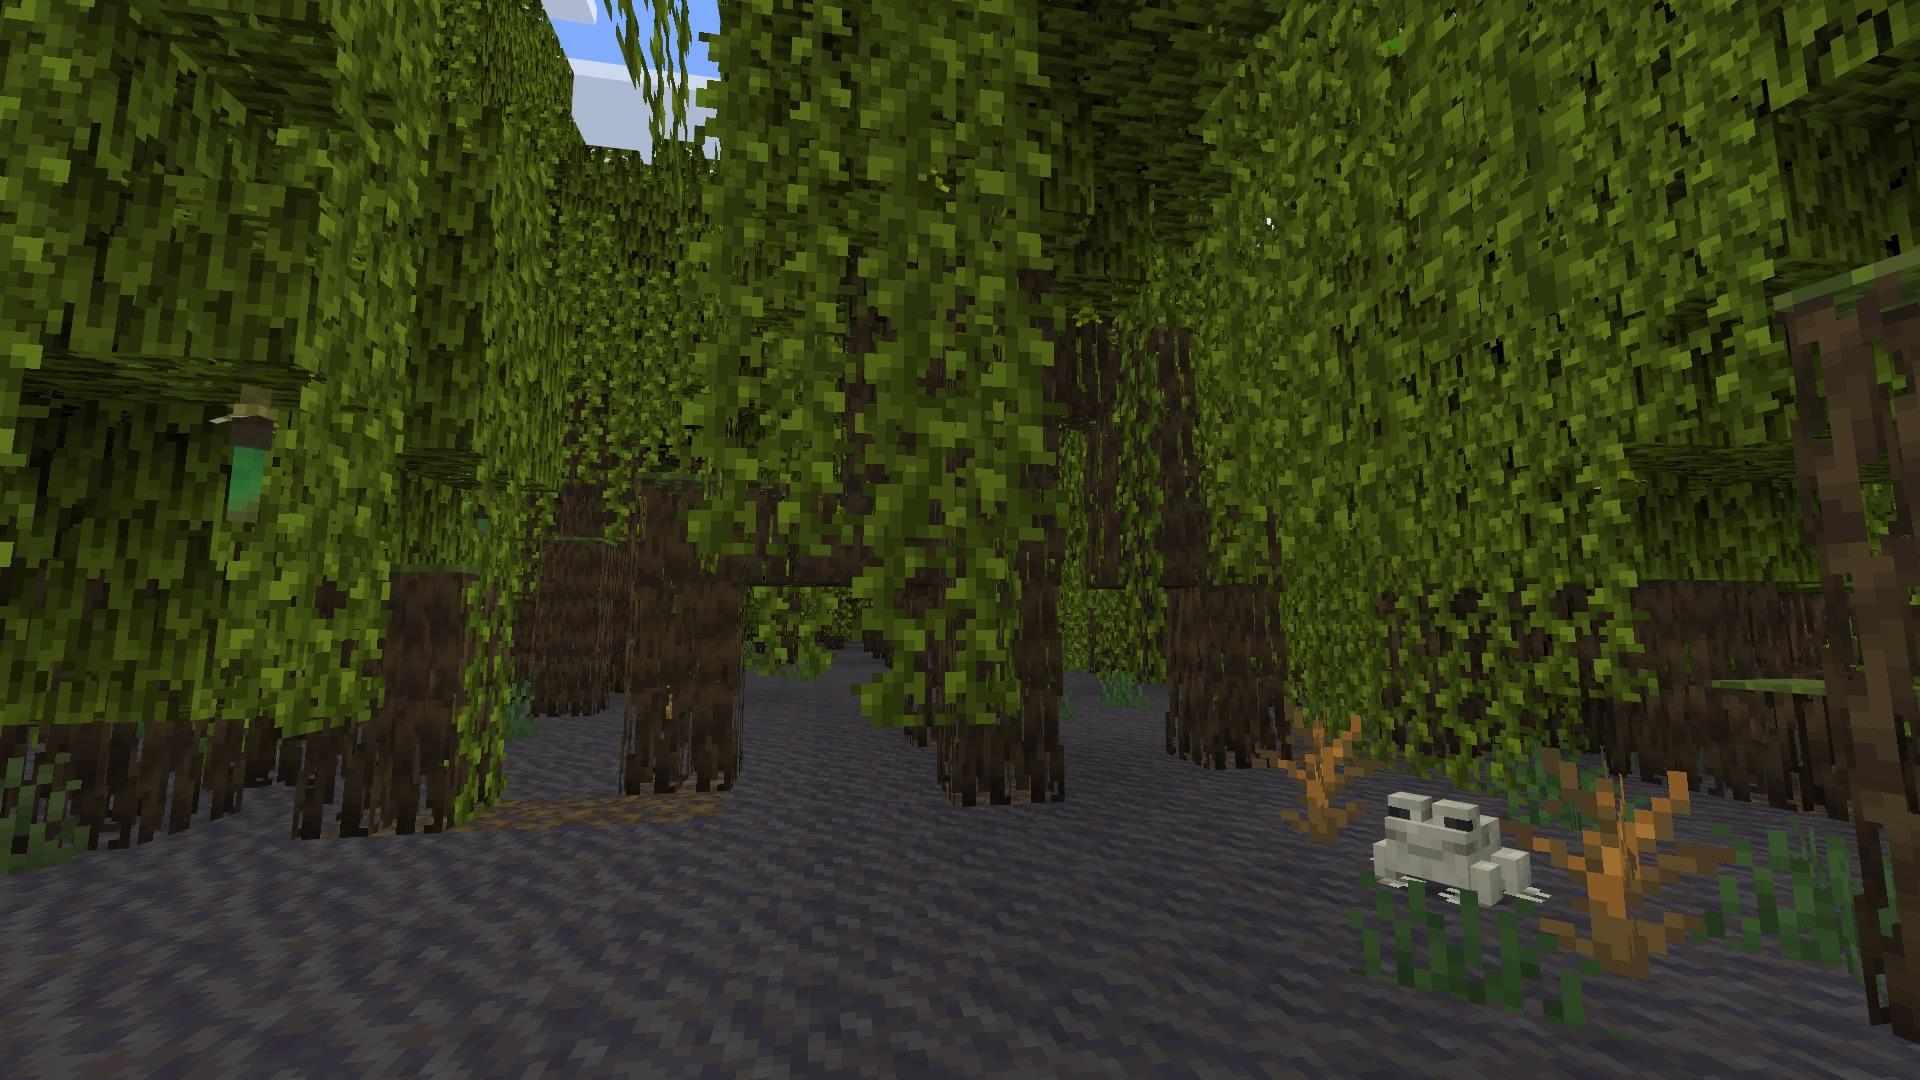 How to Find the Mangrove Swamp in 'Minecraft'